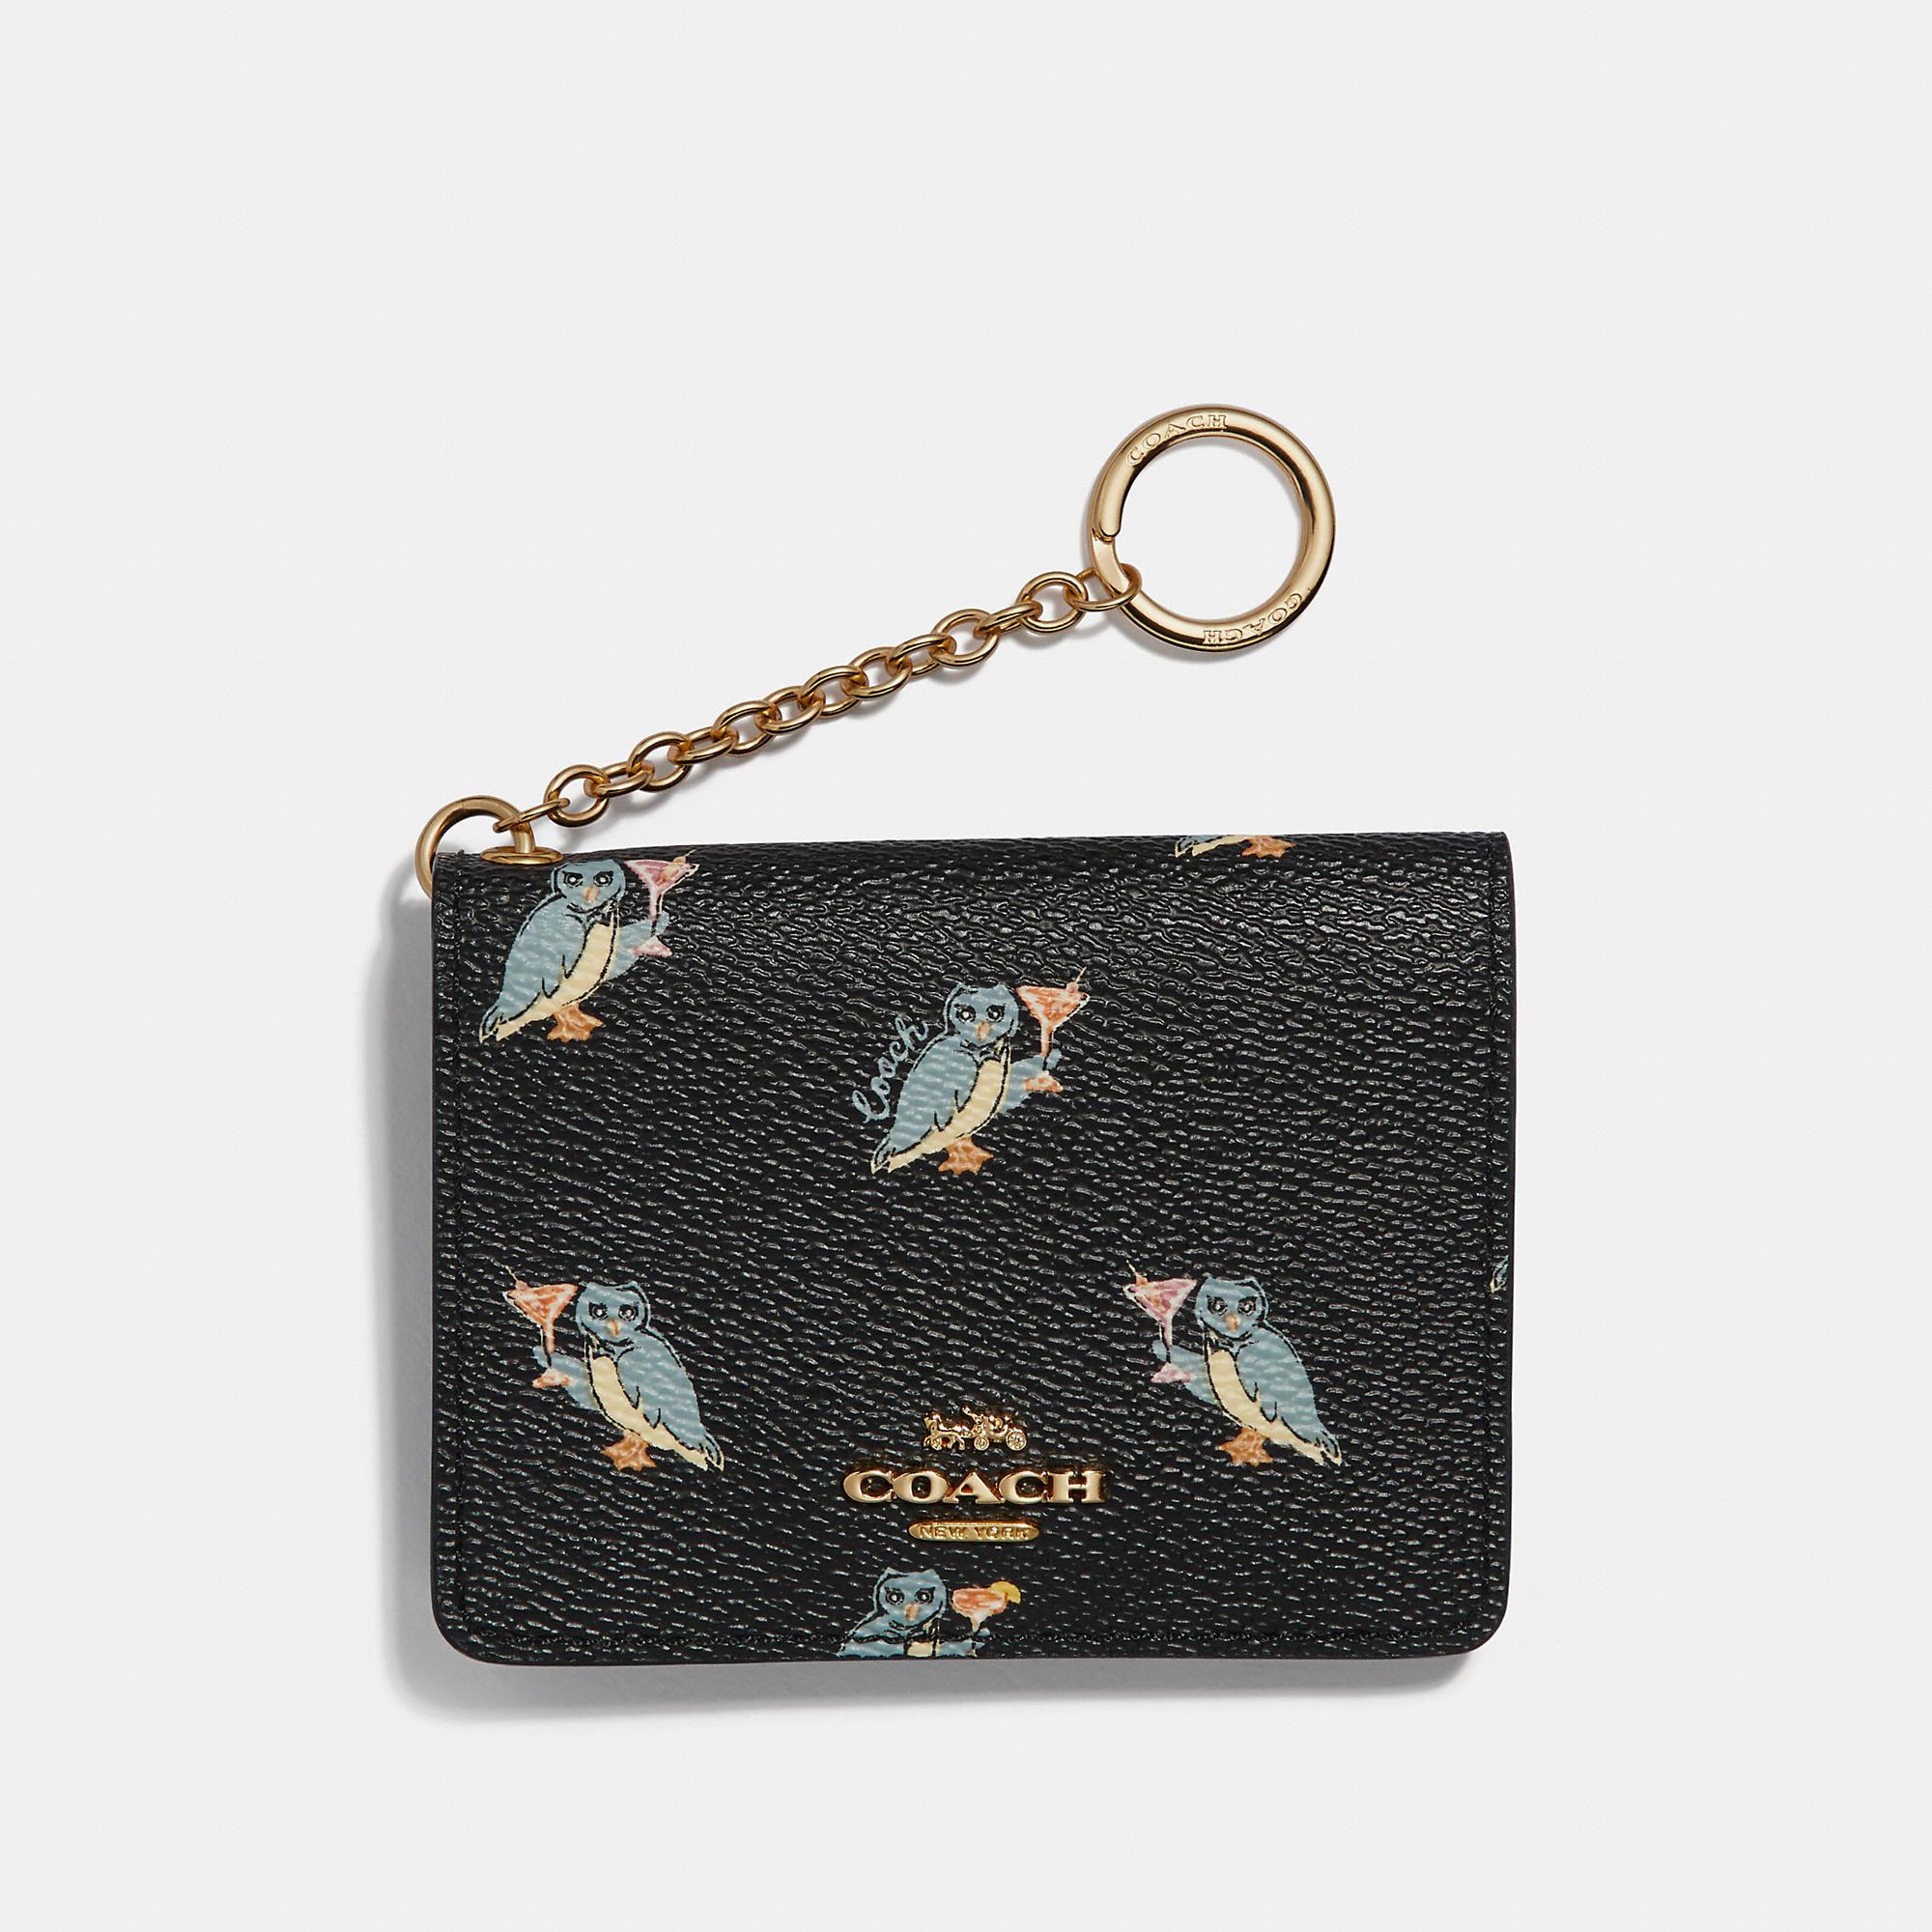 COACH Canvas Key Ring Card Case With Party Owl Print in Black/Gold (Black)  - Lyst